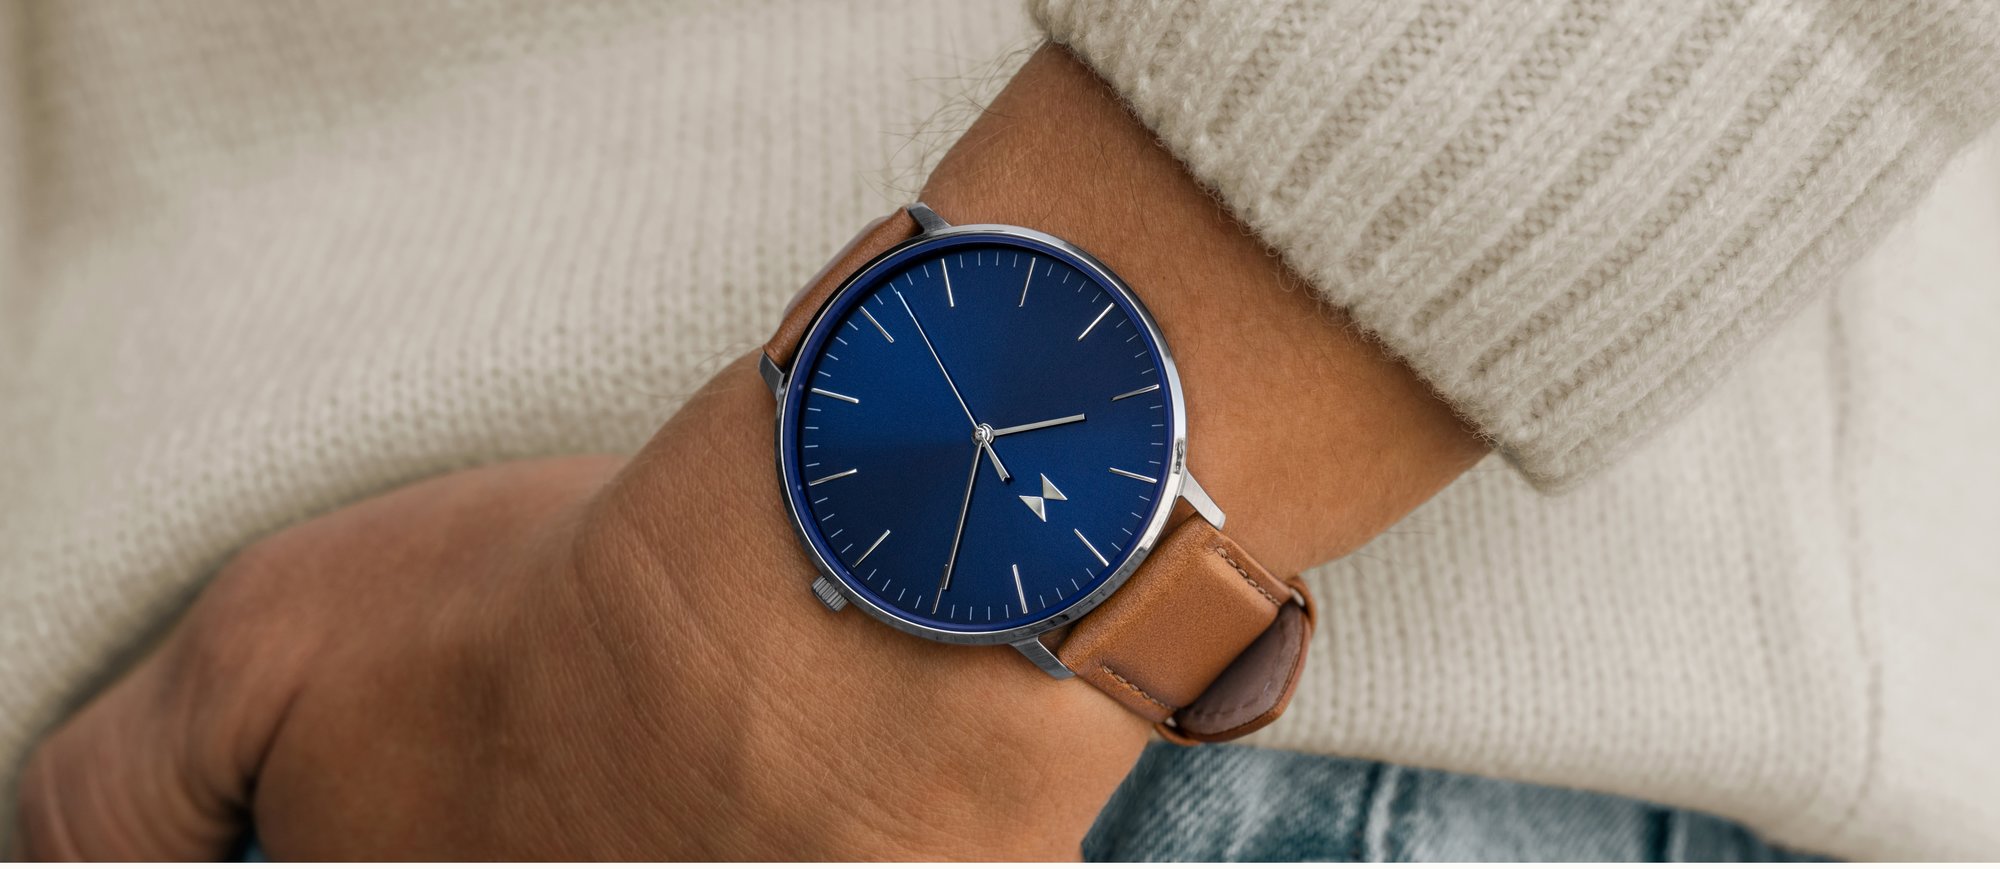 MVMT Legacy Slim watch with tan strap and blue face on wrist